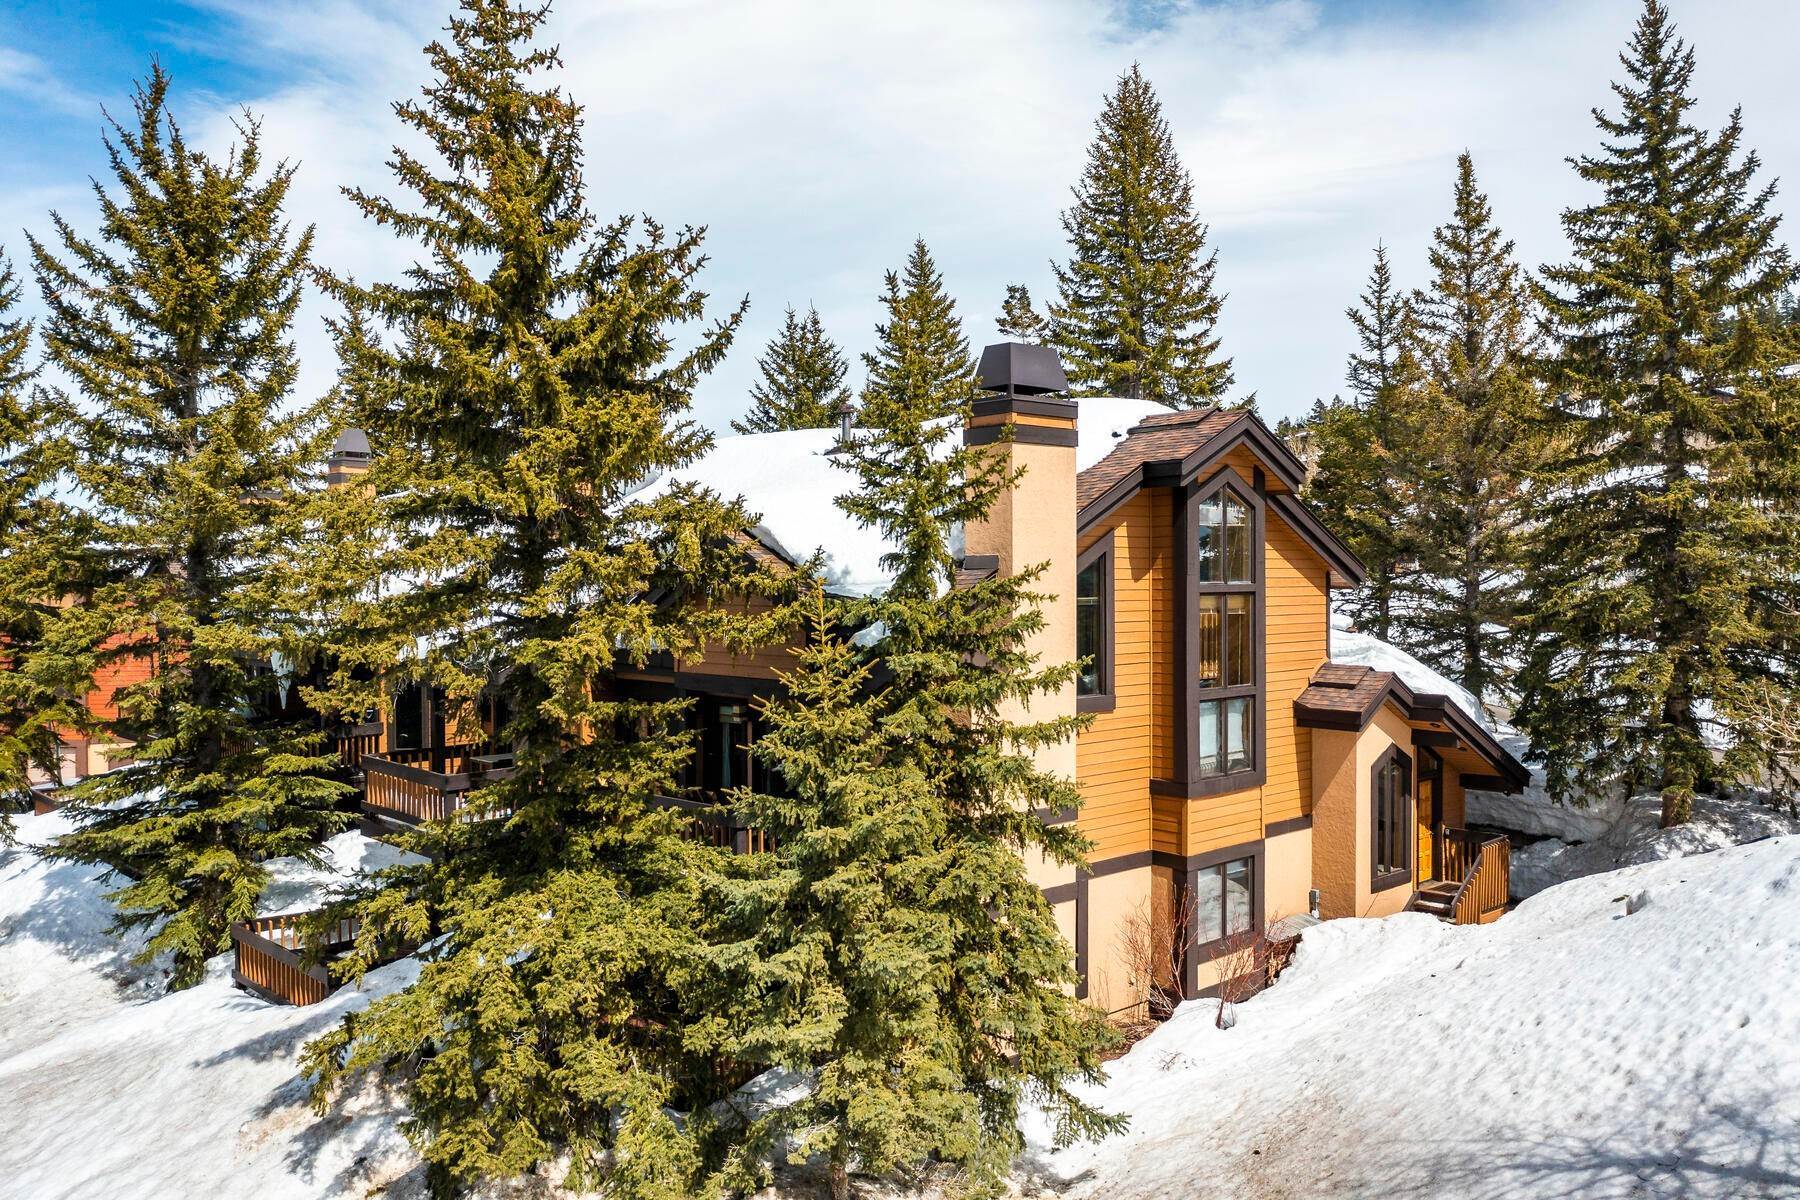 Townhouse for Sale at Deer Valley Townhome With Mountain Views and Ski Access! 7981 Ridgepoint Drive #105 Park City, Utah 84060 United States